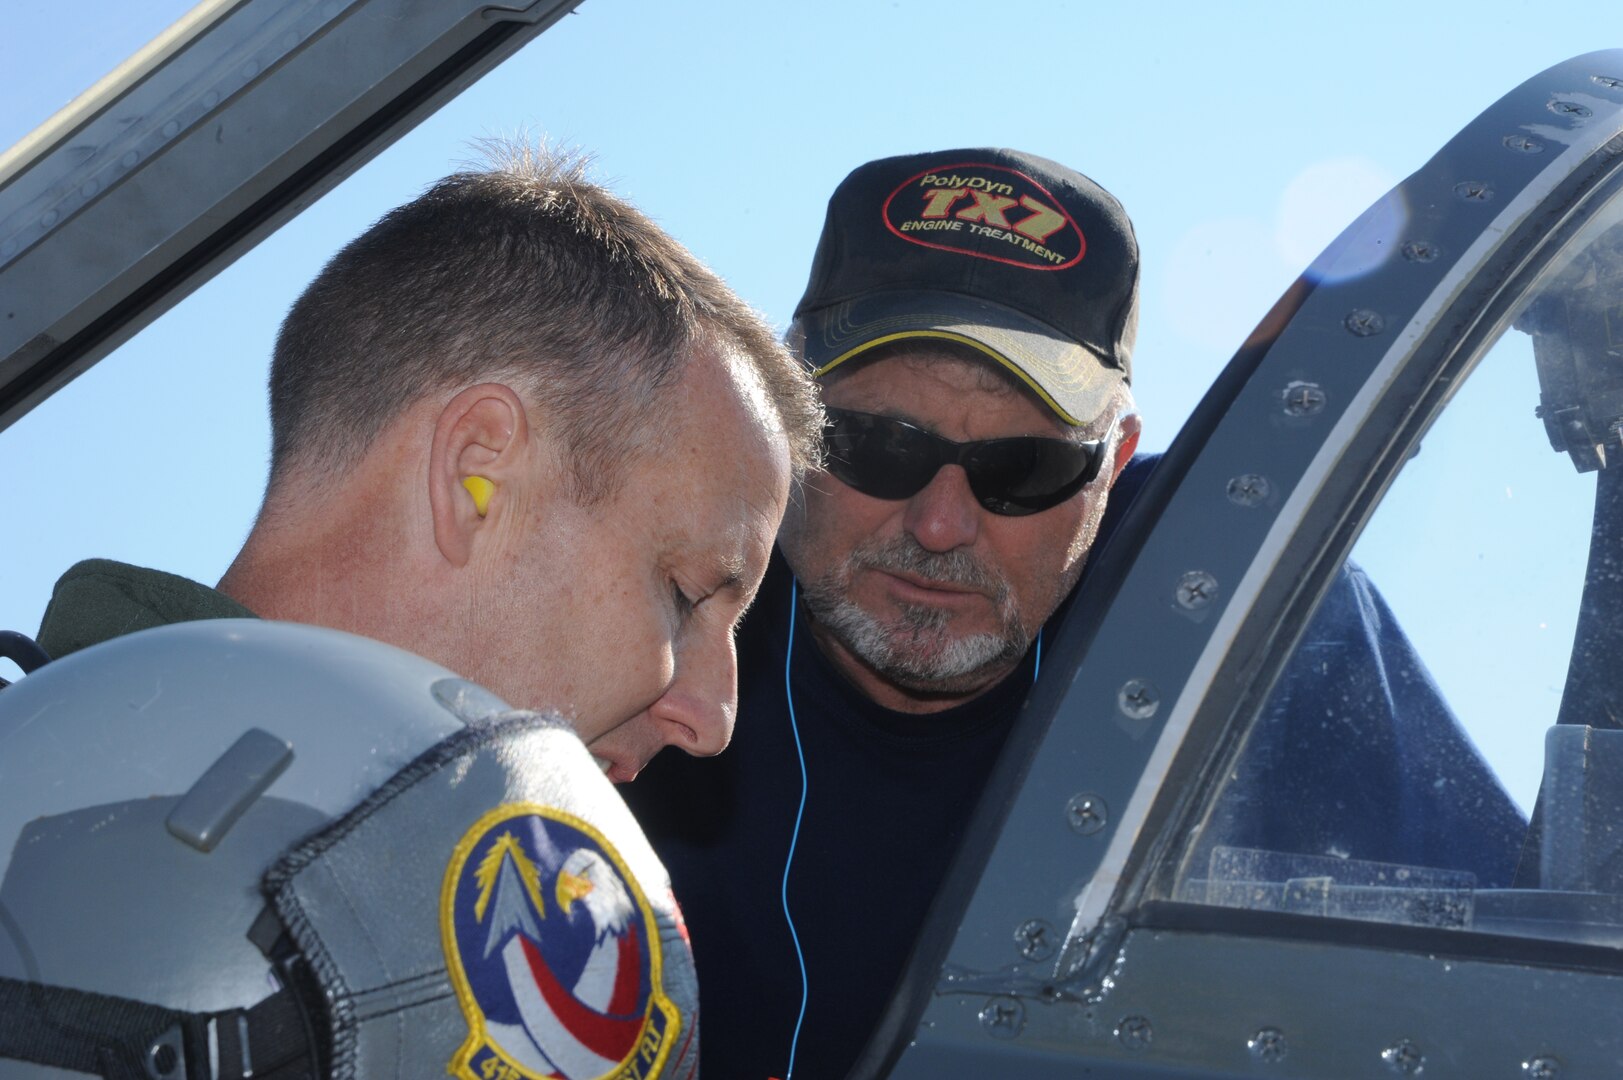 Keith Barnes (right), 571st Aircraft Maintenance Squadron contractor, helps Lt. Col. Ripley Woodard, 415th Flight Test Flight commander, strap into a T-38 Talon prior to takeoff May 17 from Joint Base San Antonio-Randolph, Texas. The T-38 is being returned to Sheppard Air Force Base, Texas, after being modified by the 571st here. (U.S. Air Force photo by Rich McFadden) 